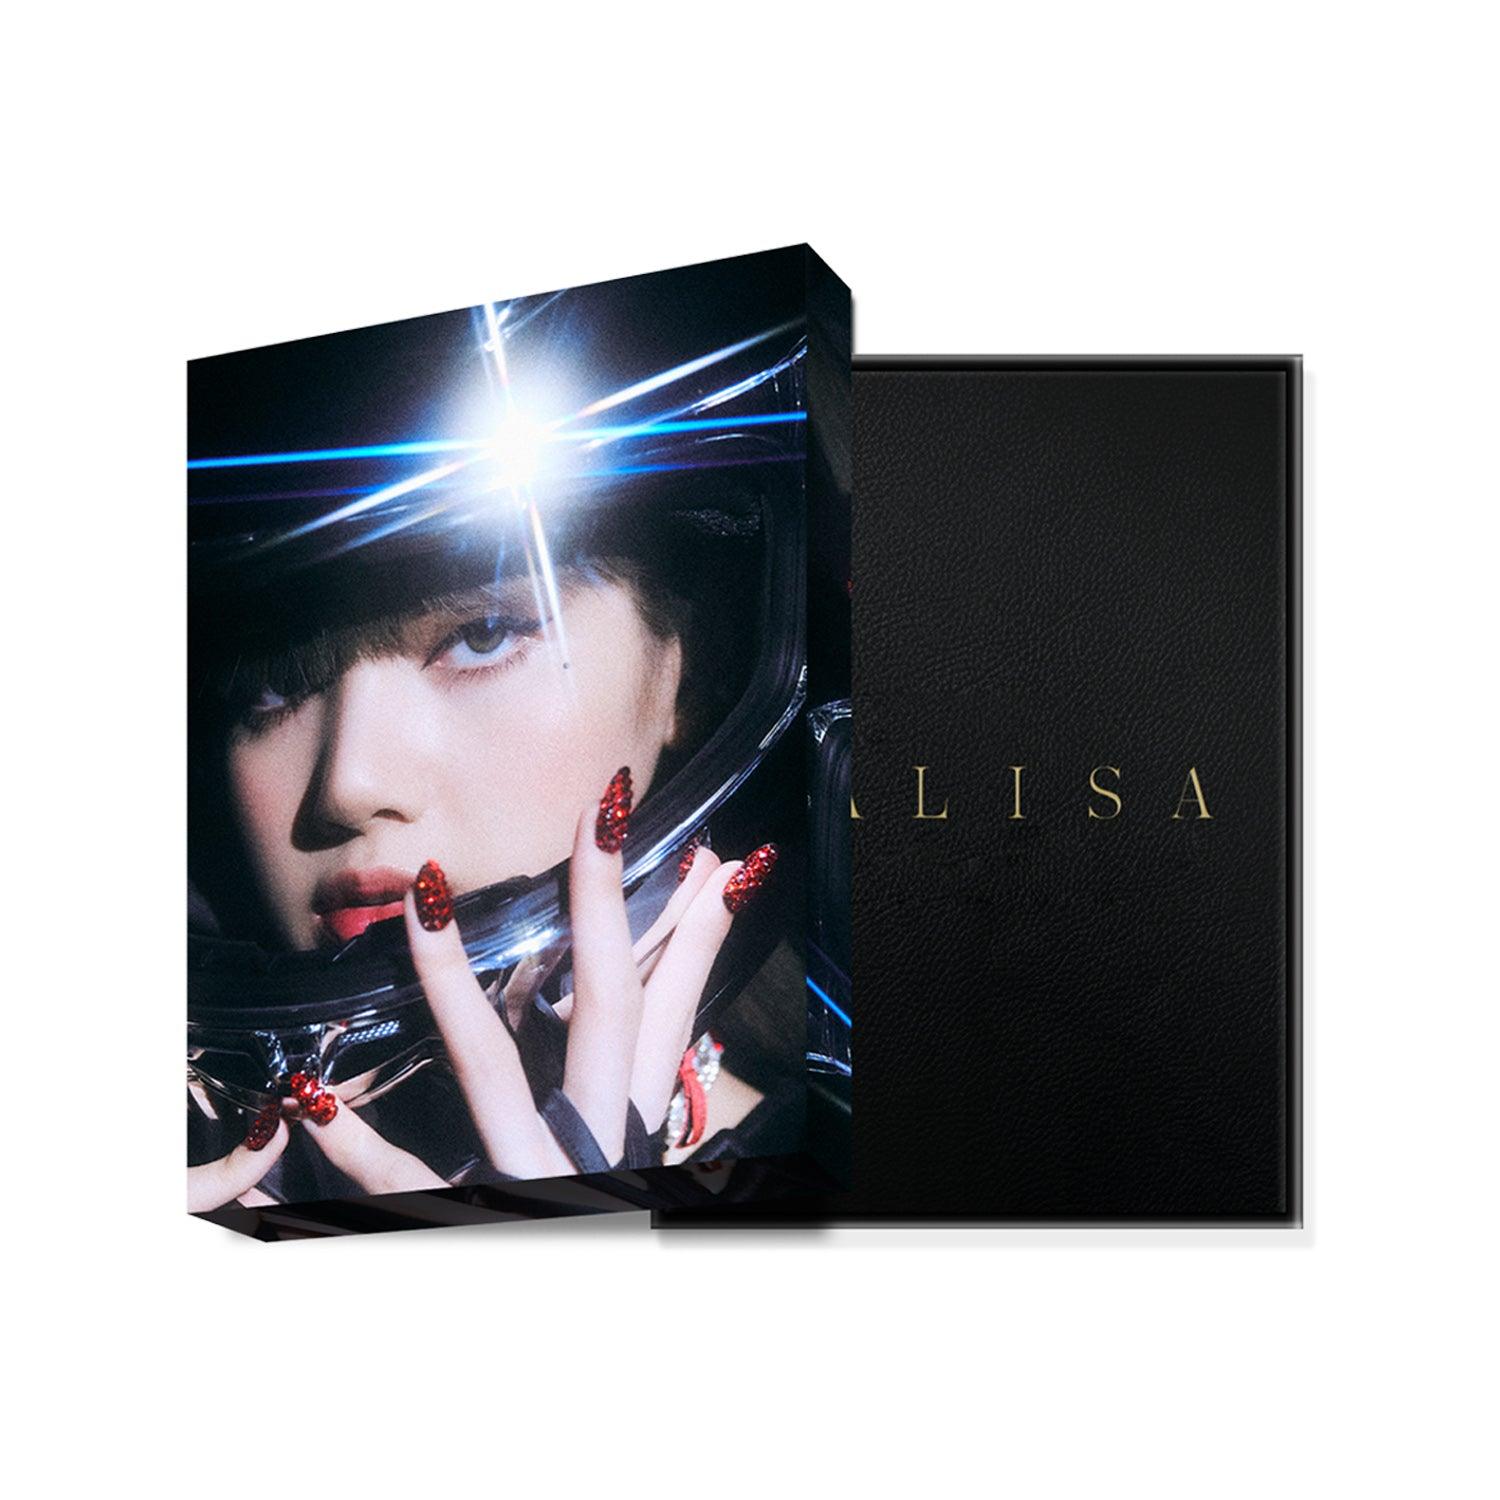 LISA 'LALISA PHOTO BOOK' (SPECIAL EDITION) COVER